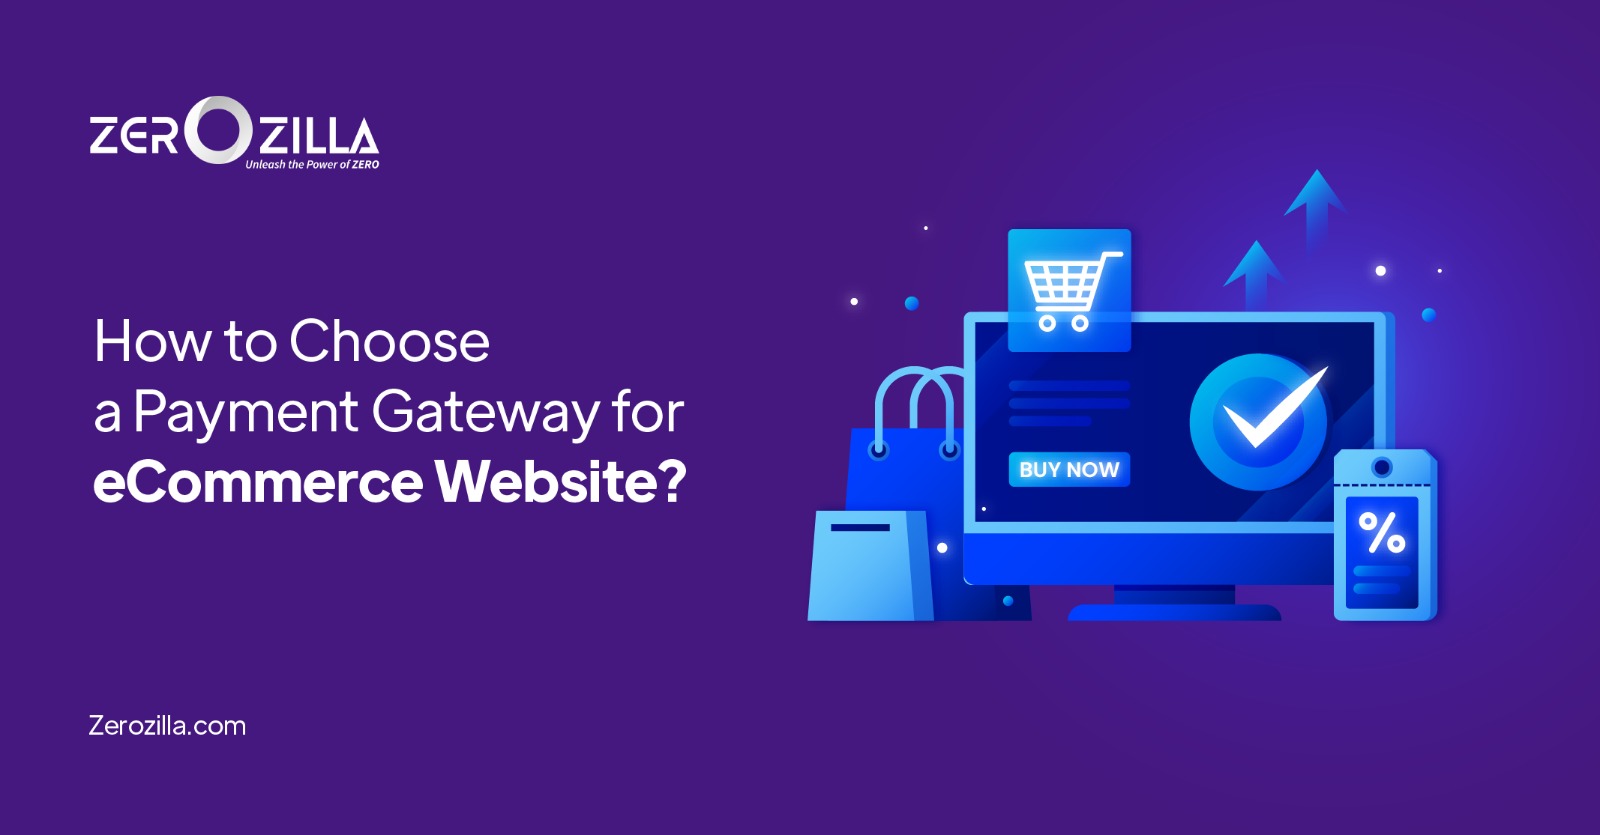 How to Choose a Payment Gateway for eCommerce Website